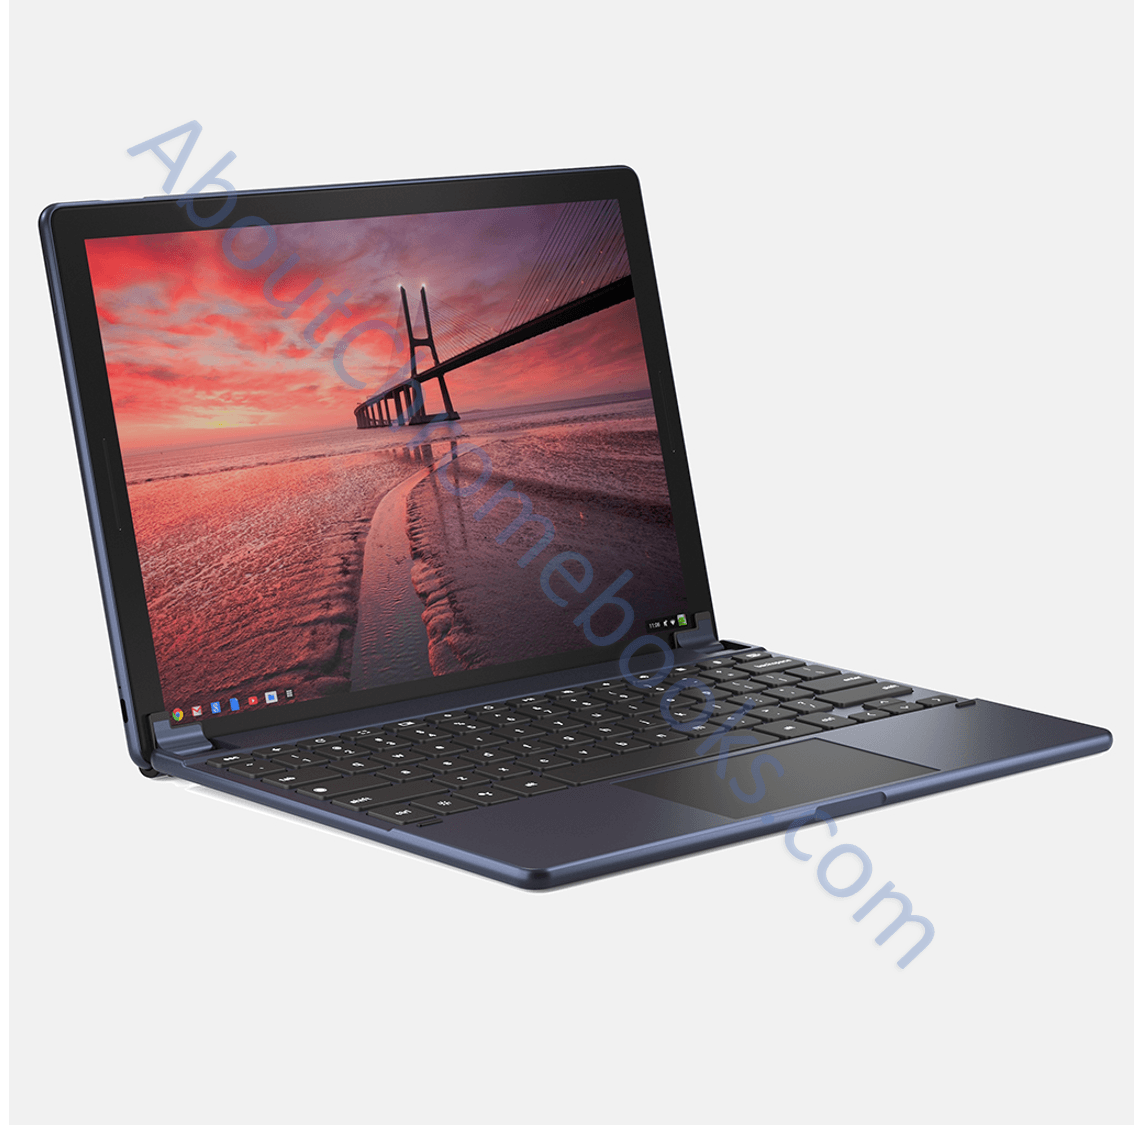 Nocturne Chrome tablet to have higher resolution screen than Pixelbook with a 3000×2000 display